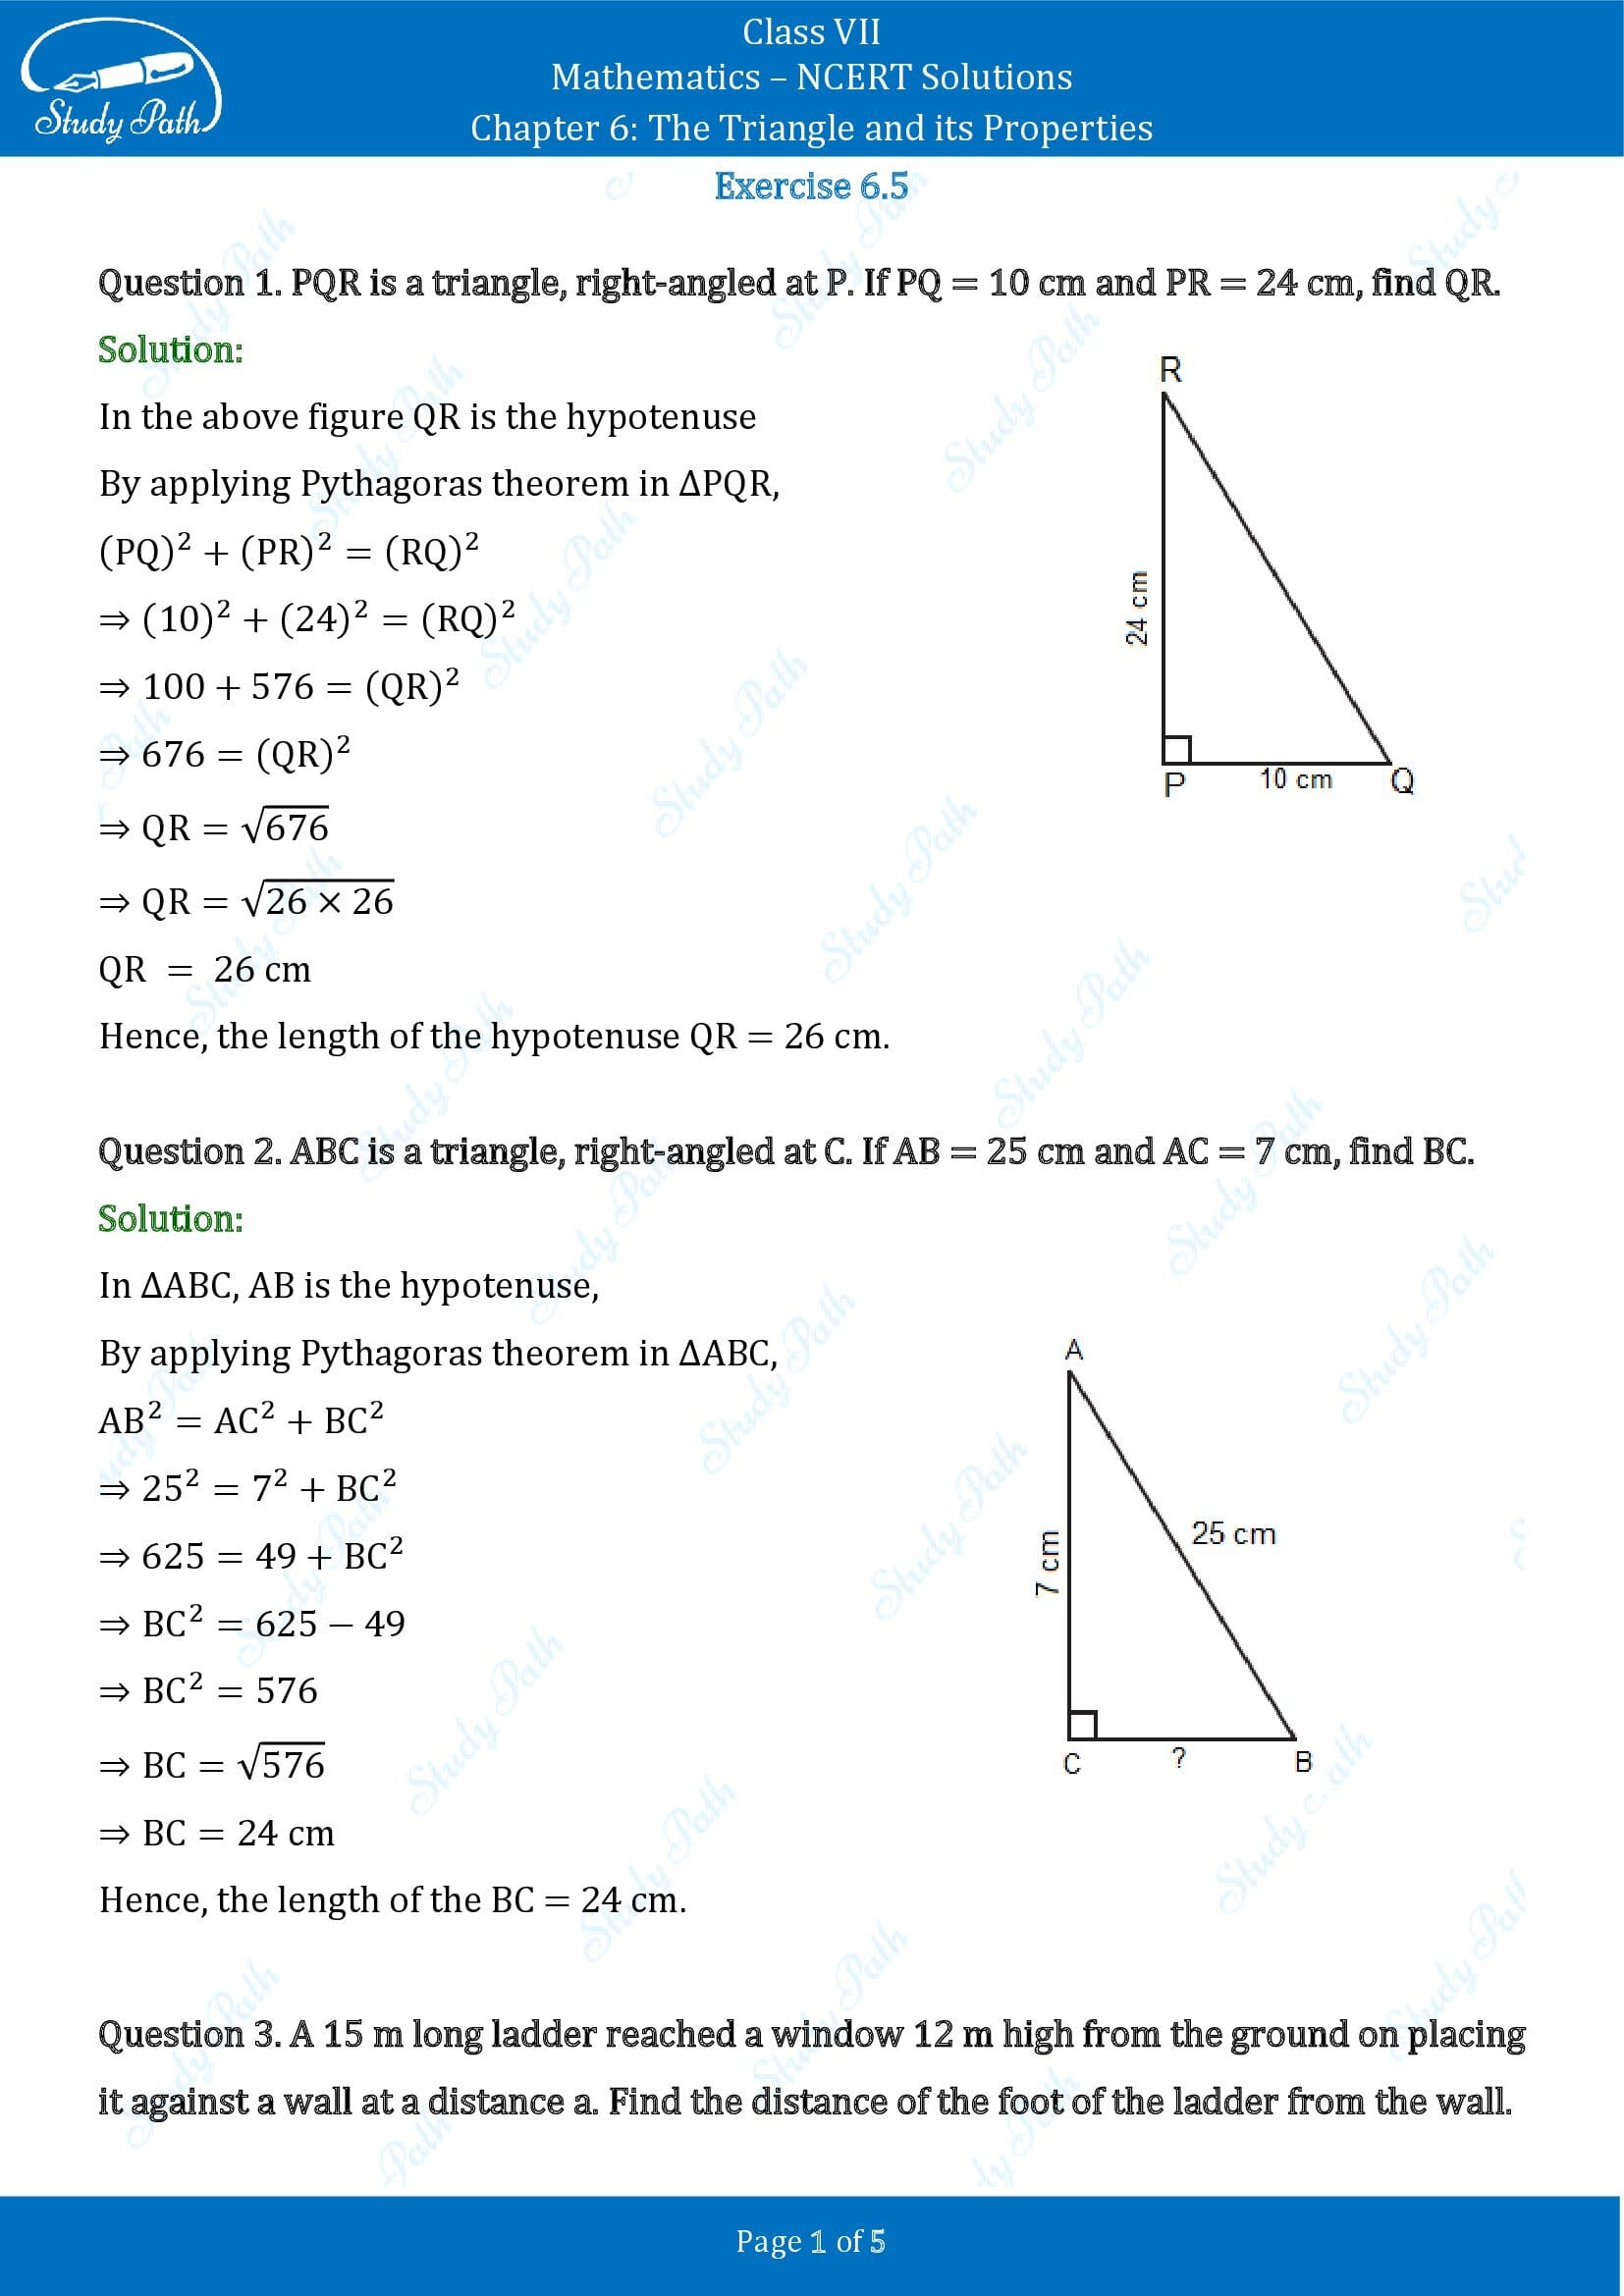 NCERT Solutions for Class 7 Maths Chapter 6 The Triangle and its Properties Exercise 6.5 00001